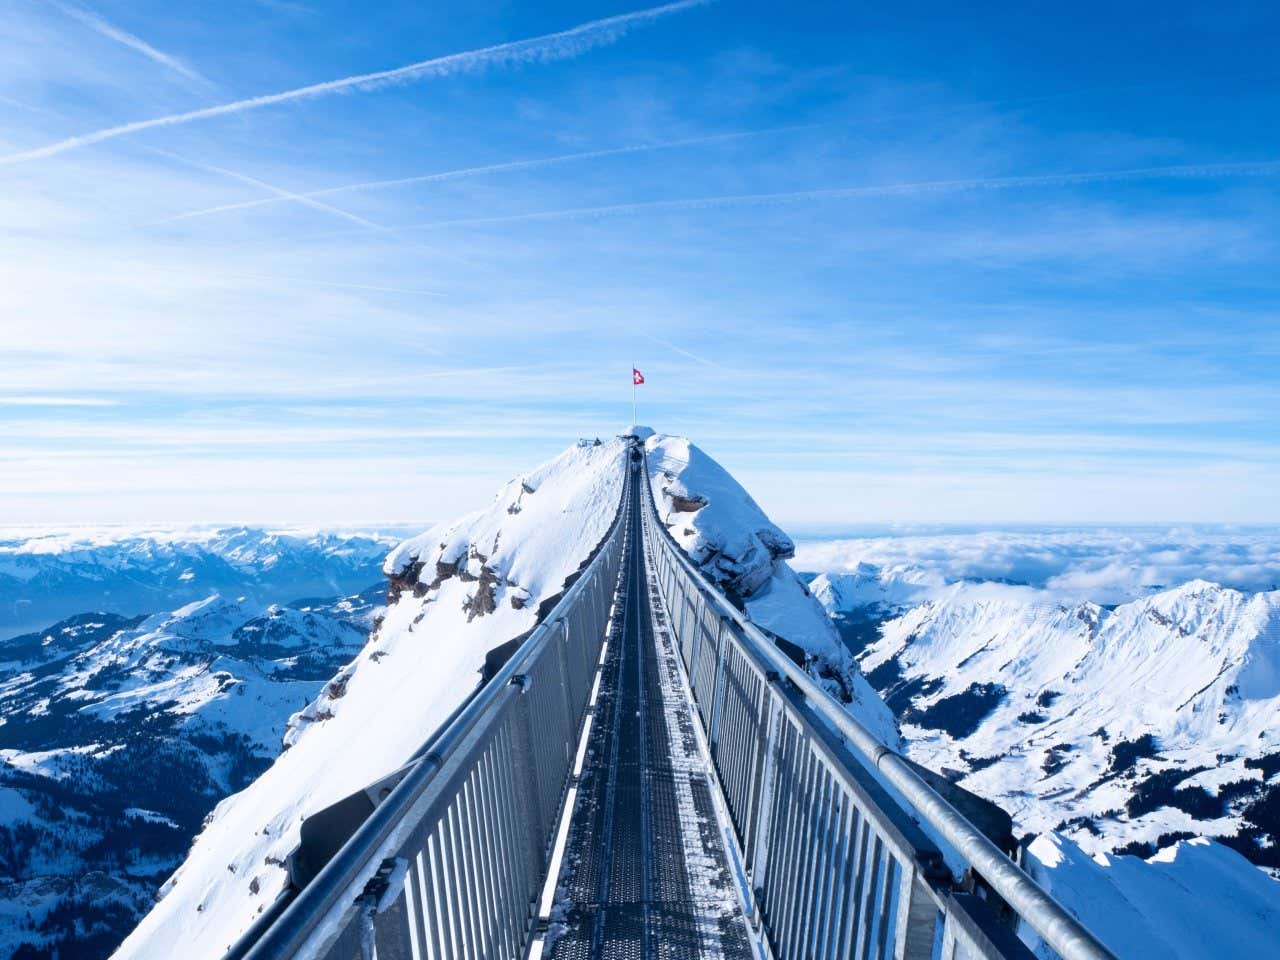 Peak Walk by Tissot footbridge on Glacier 3000 with the Swiss flag at the top and a breathtaking view of the surrounding snow-capped mountains